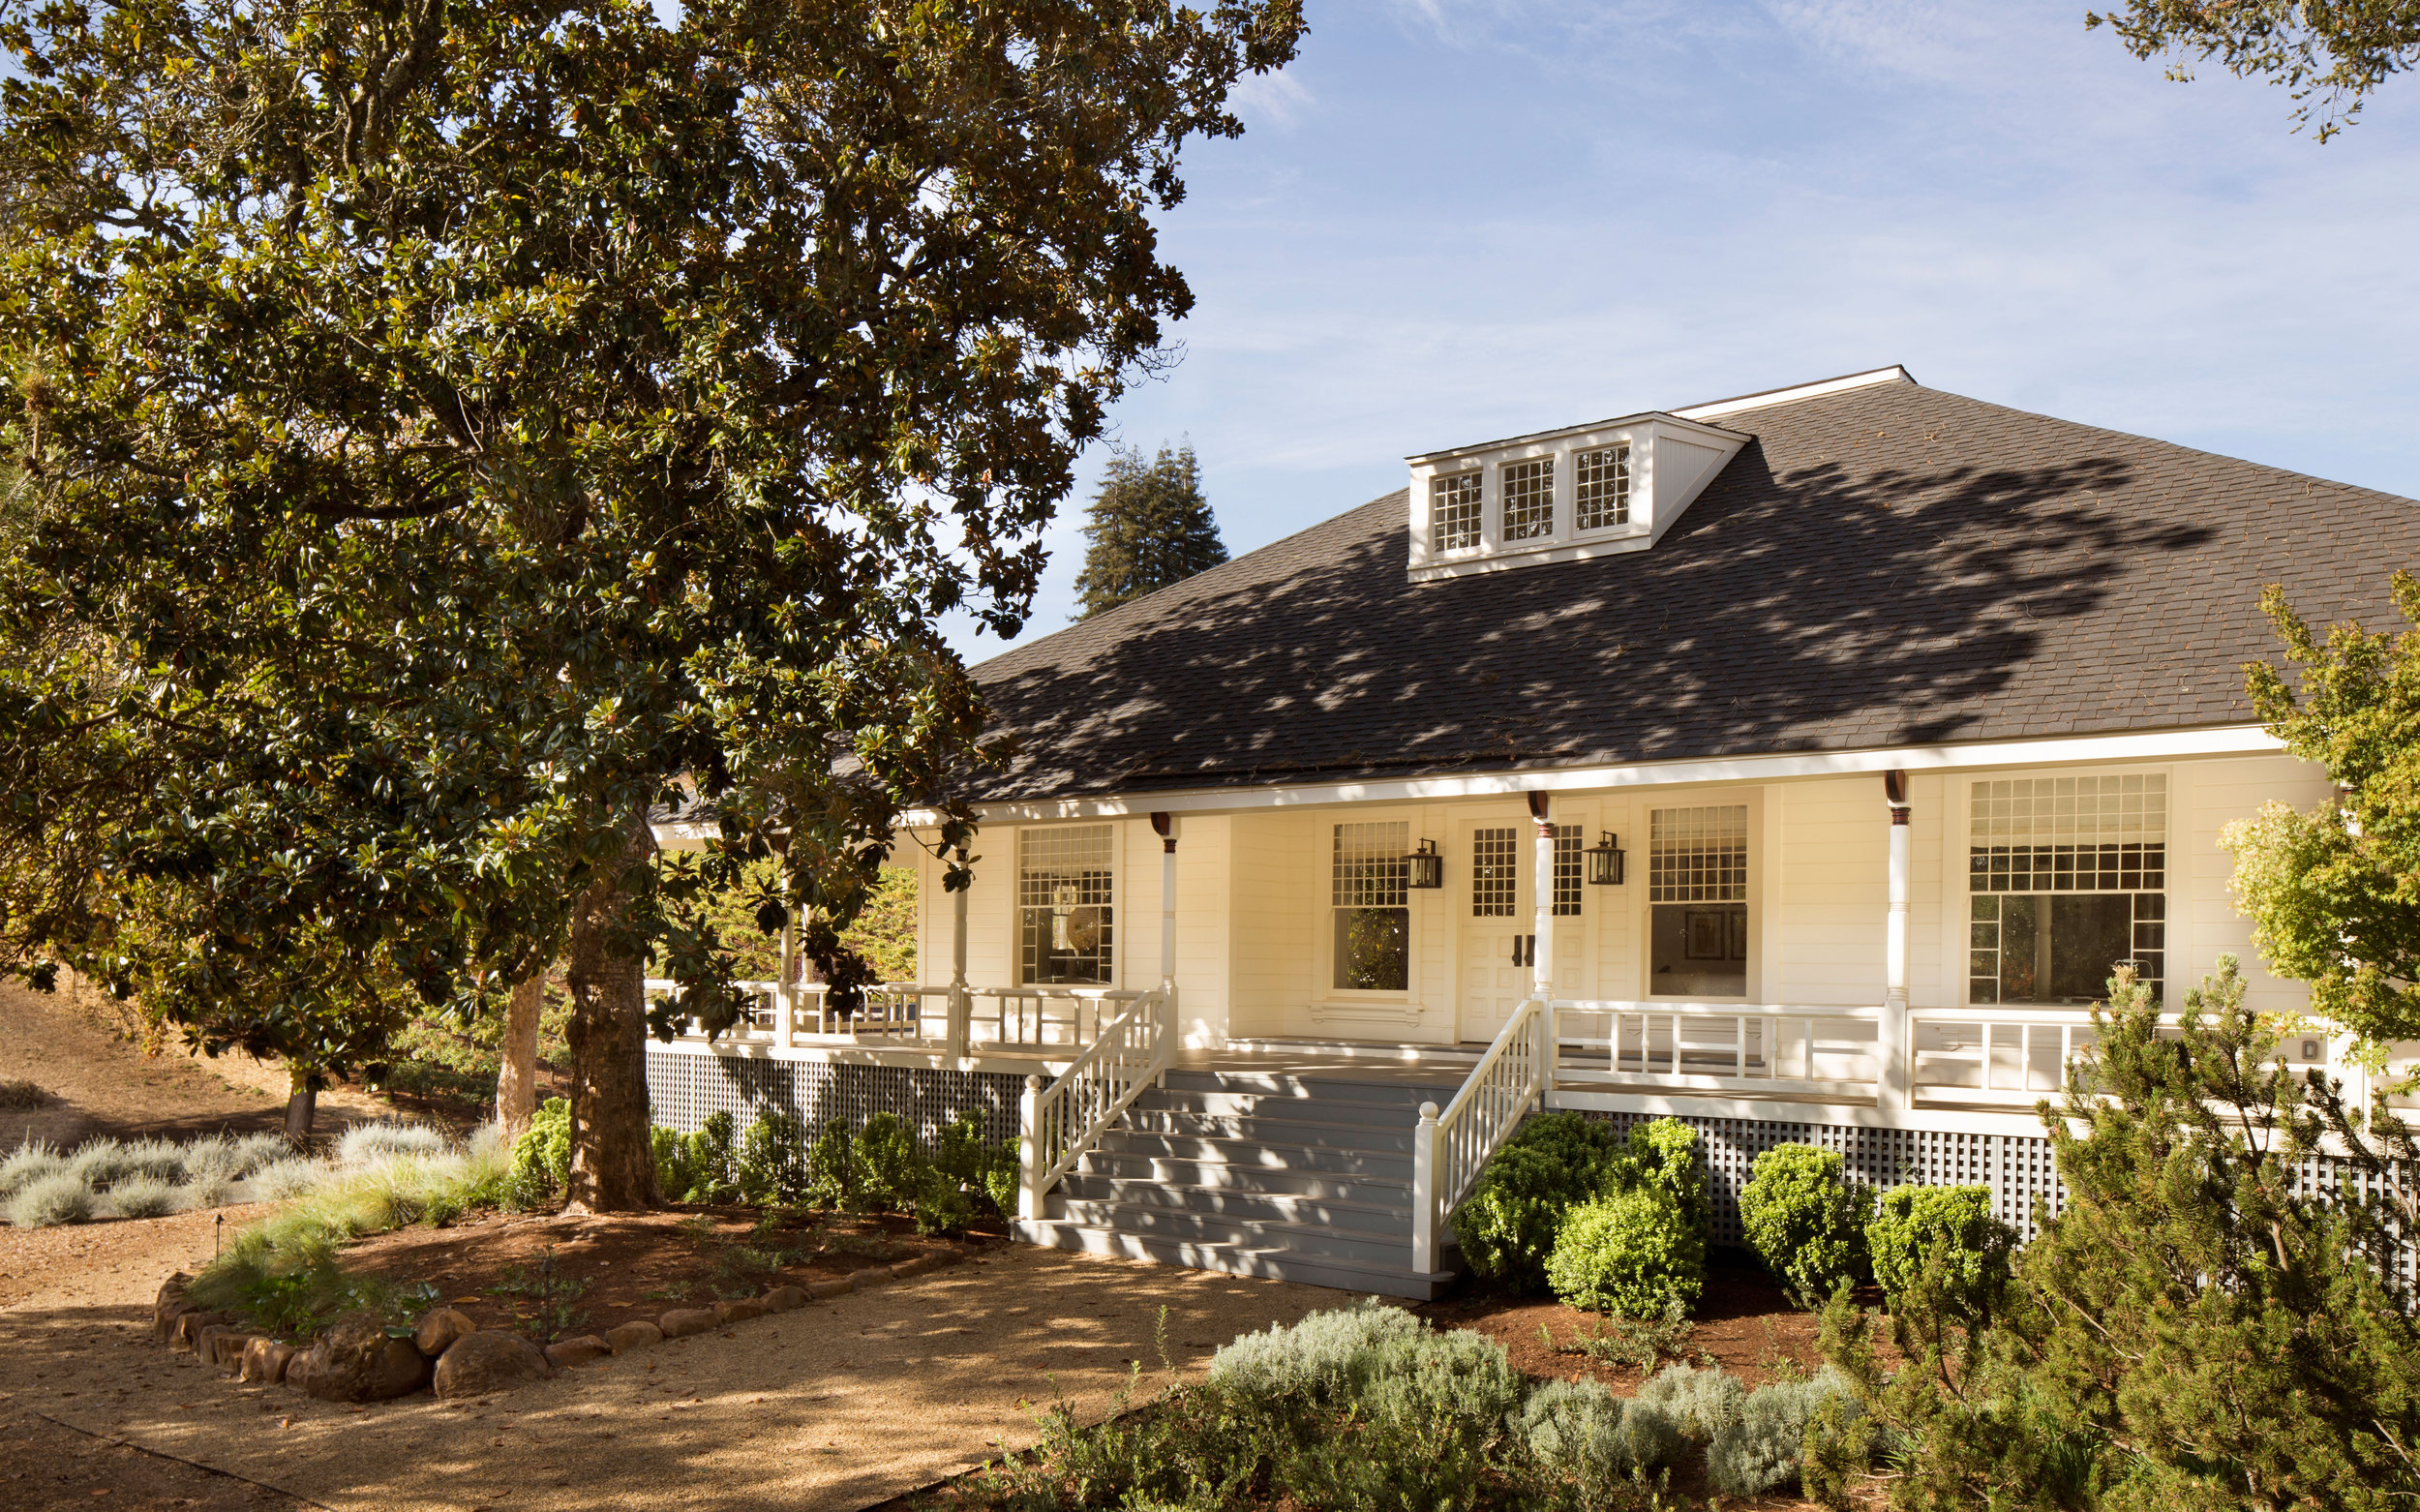 Calistoga Winery and Residence